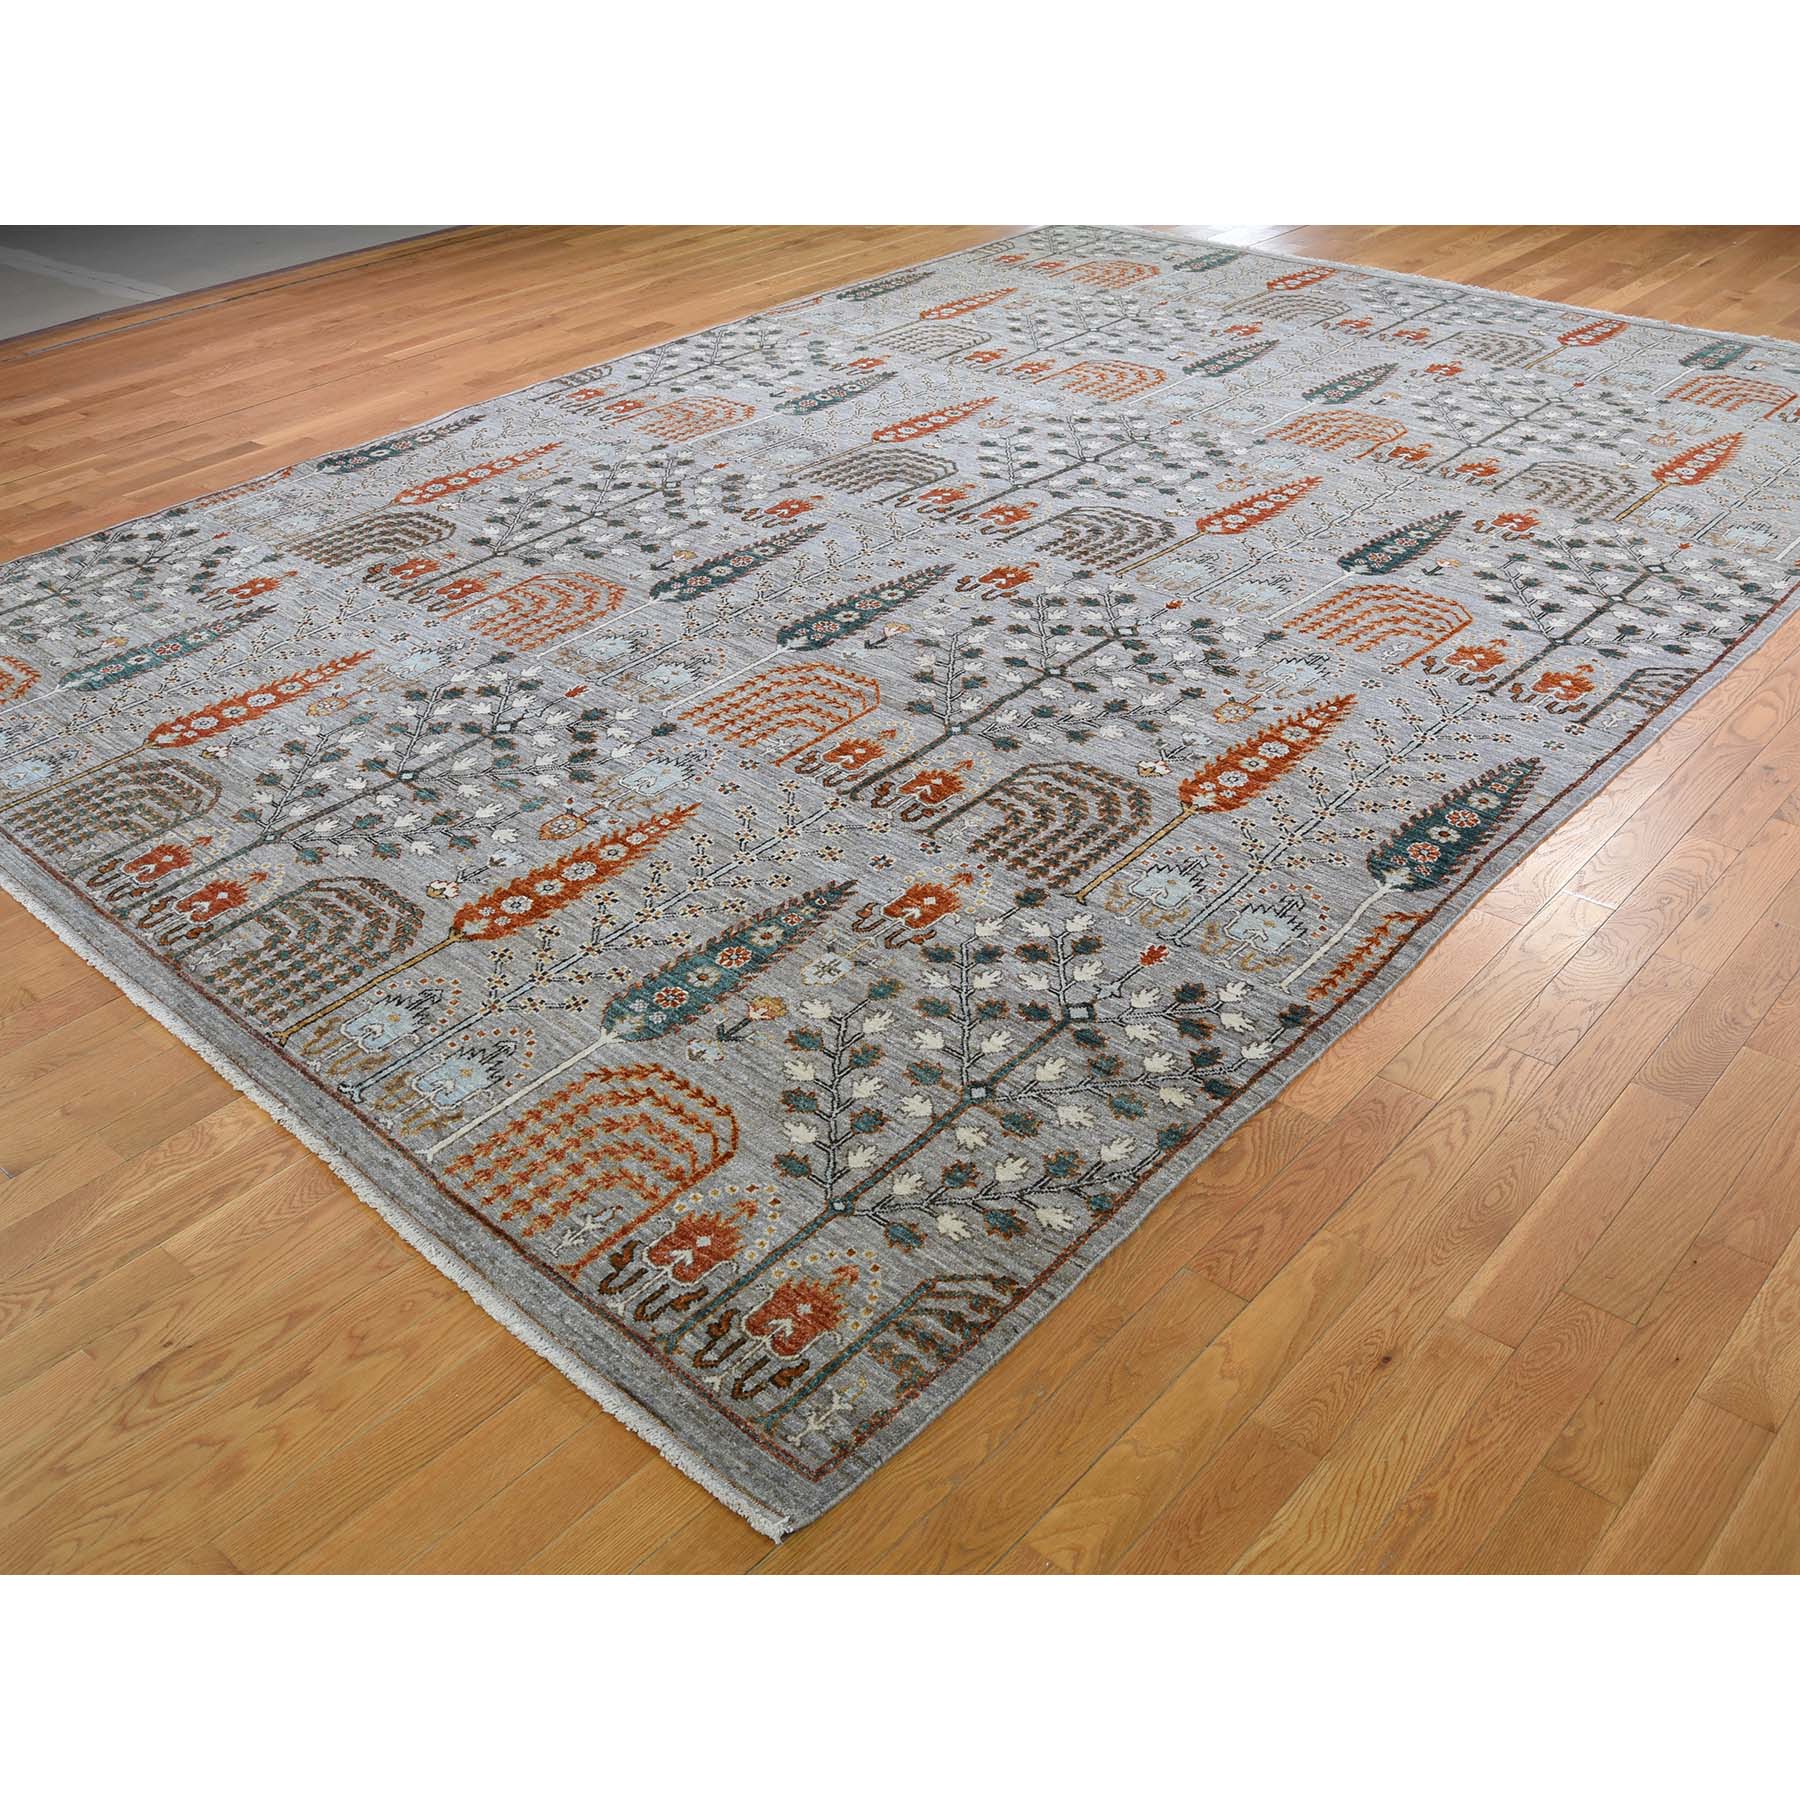 10-x14-3  Gray Peshawar Willow And Cypress Tree Design Hand-Knotted Oriental Rug 